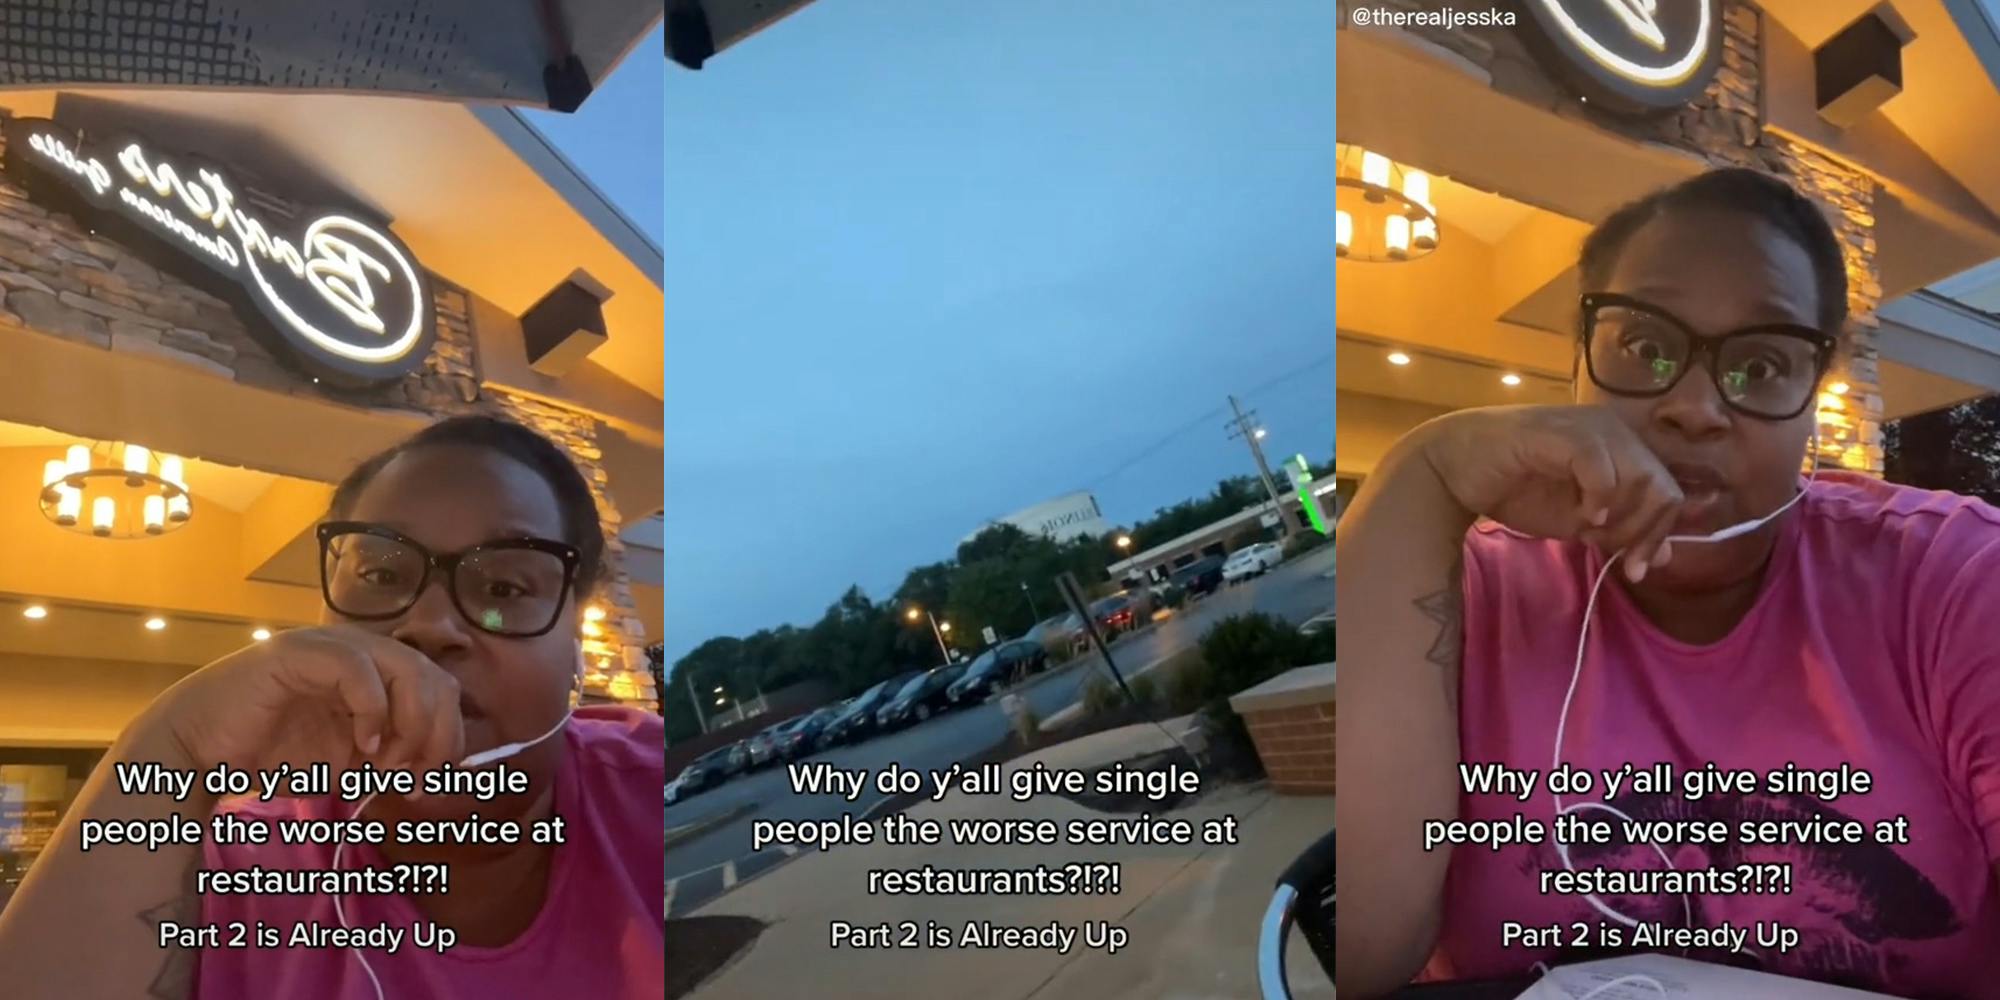 ‘I’m literally fighting back tears’: Woman says servers ignored her because she dined alone at restaurant